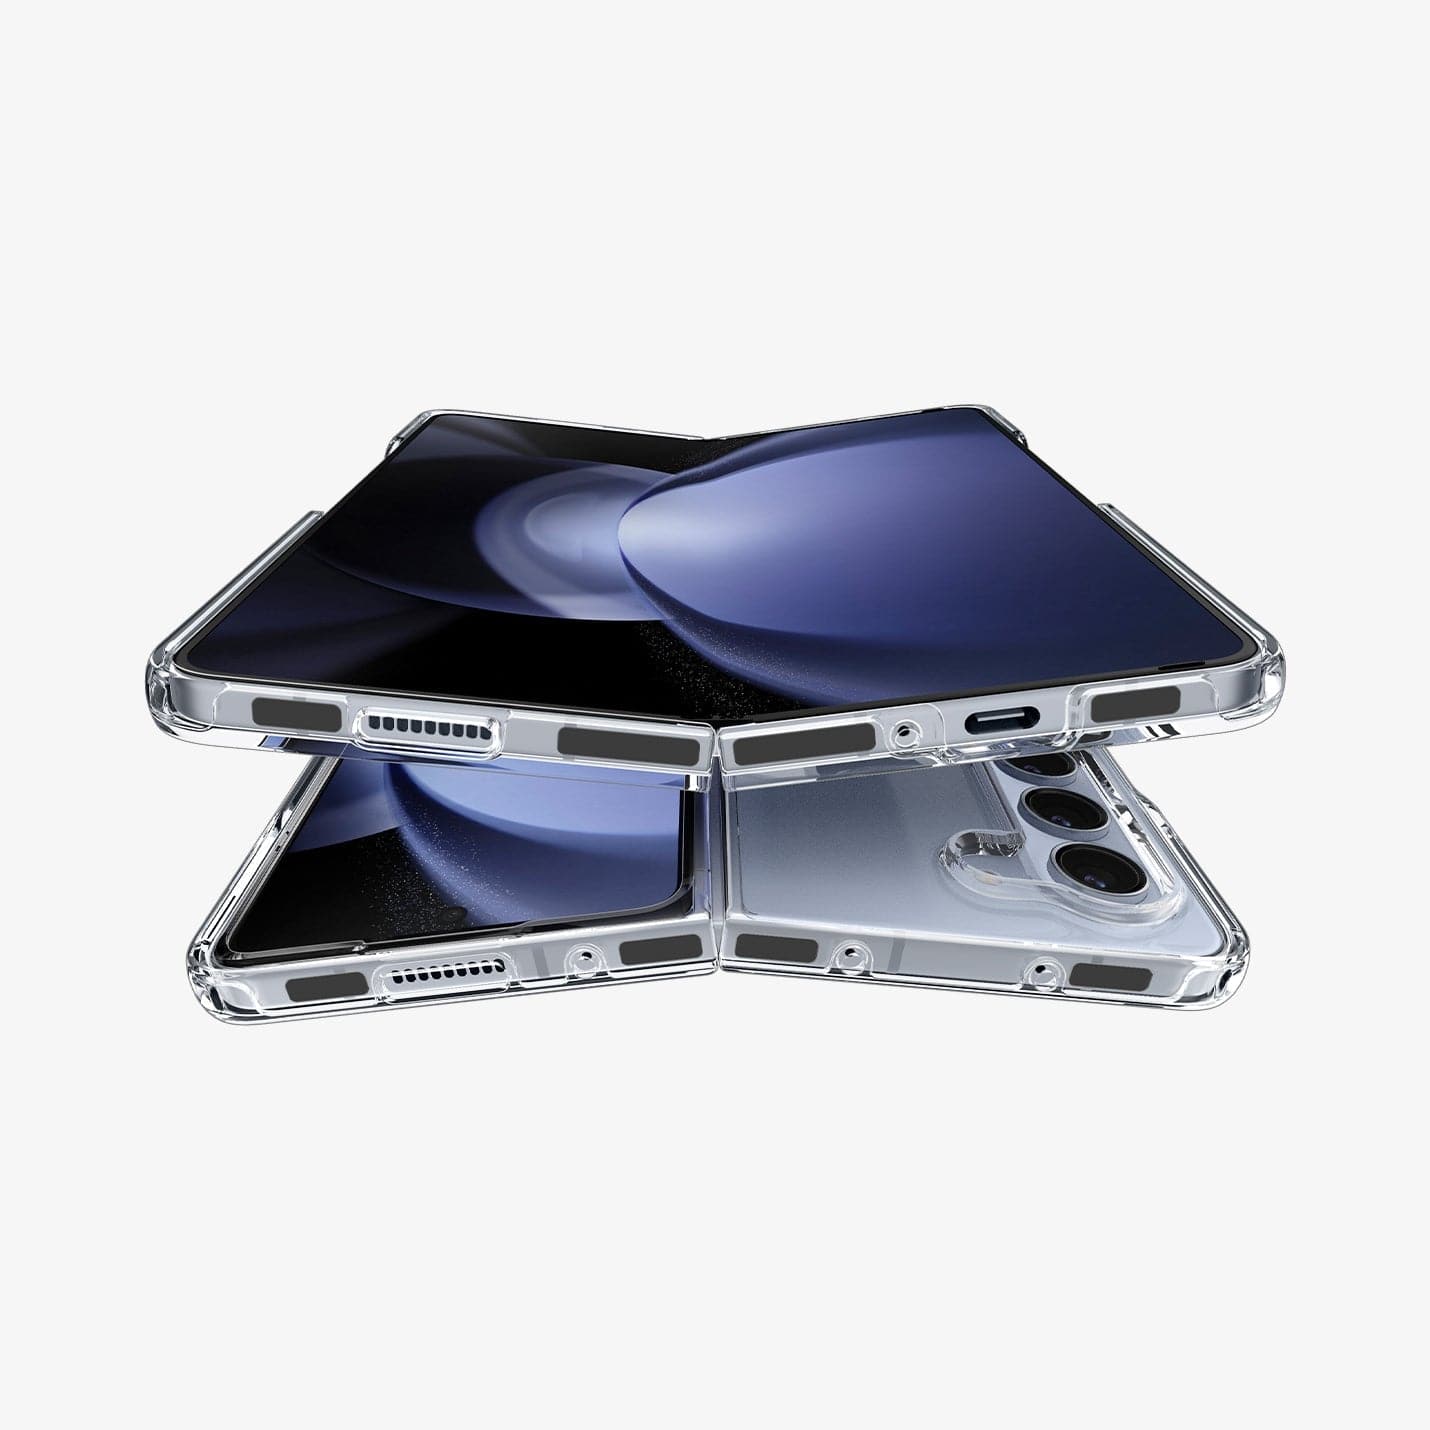 ACS06221 - Galaxy Z Fold 5 Case Ultra Hybrid in crystal clear showing the front fully open hovering above another device